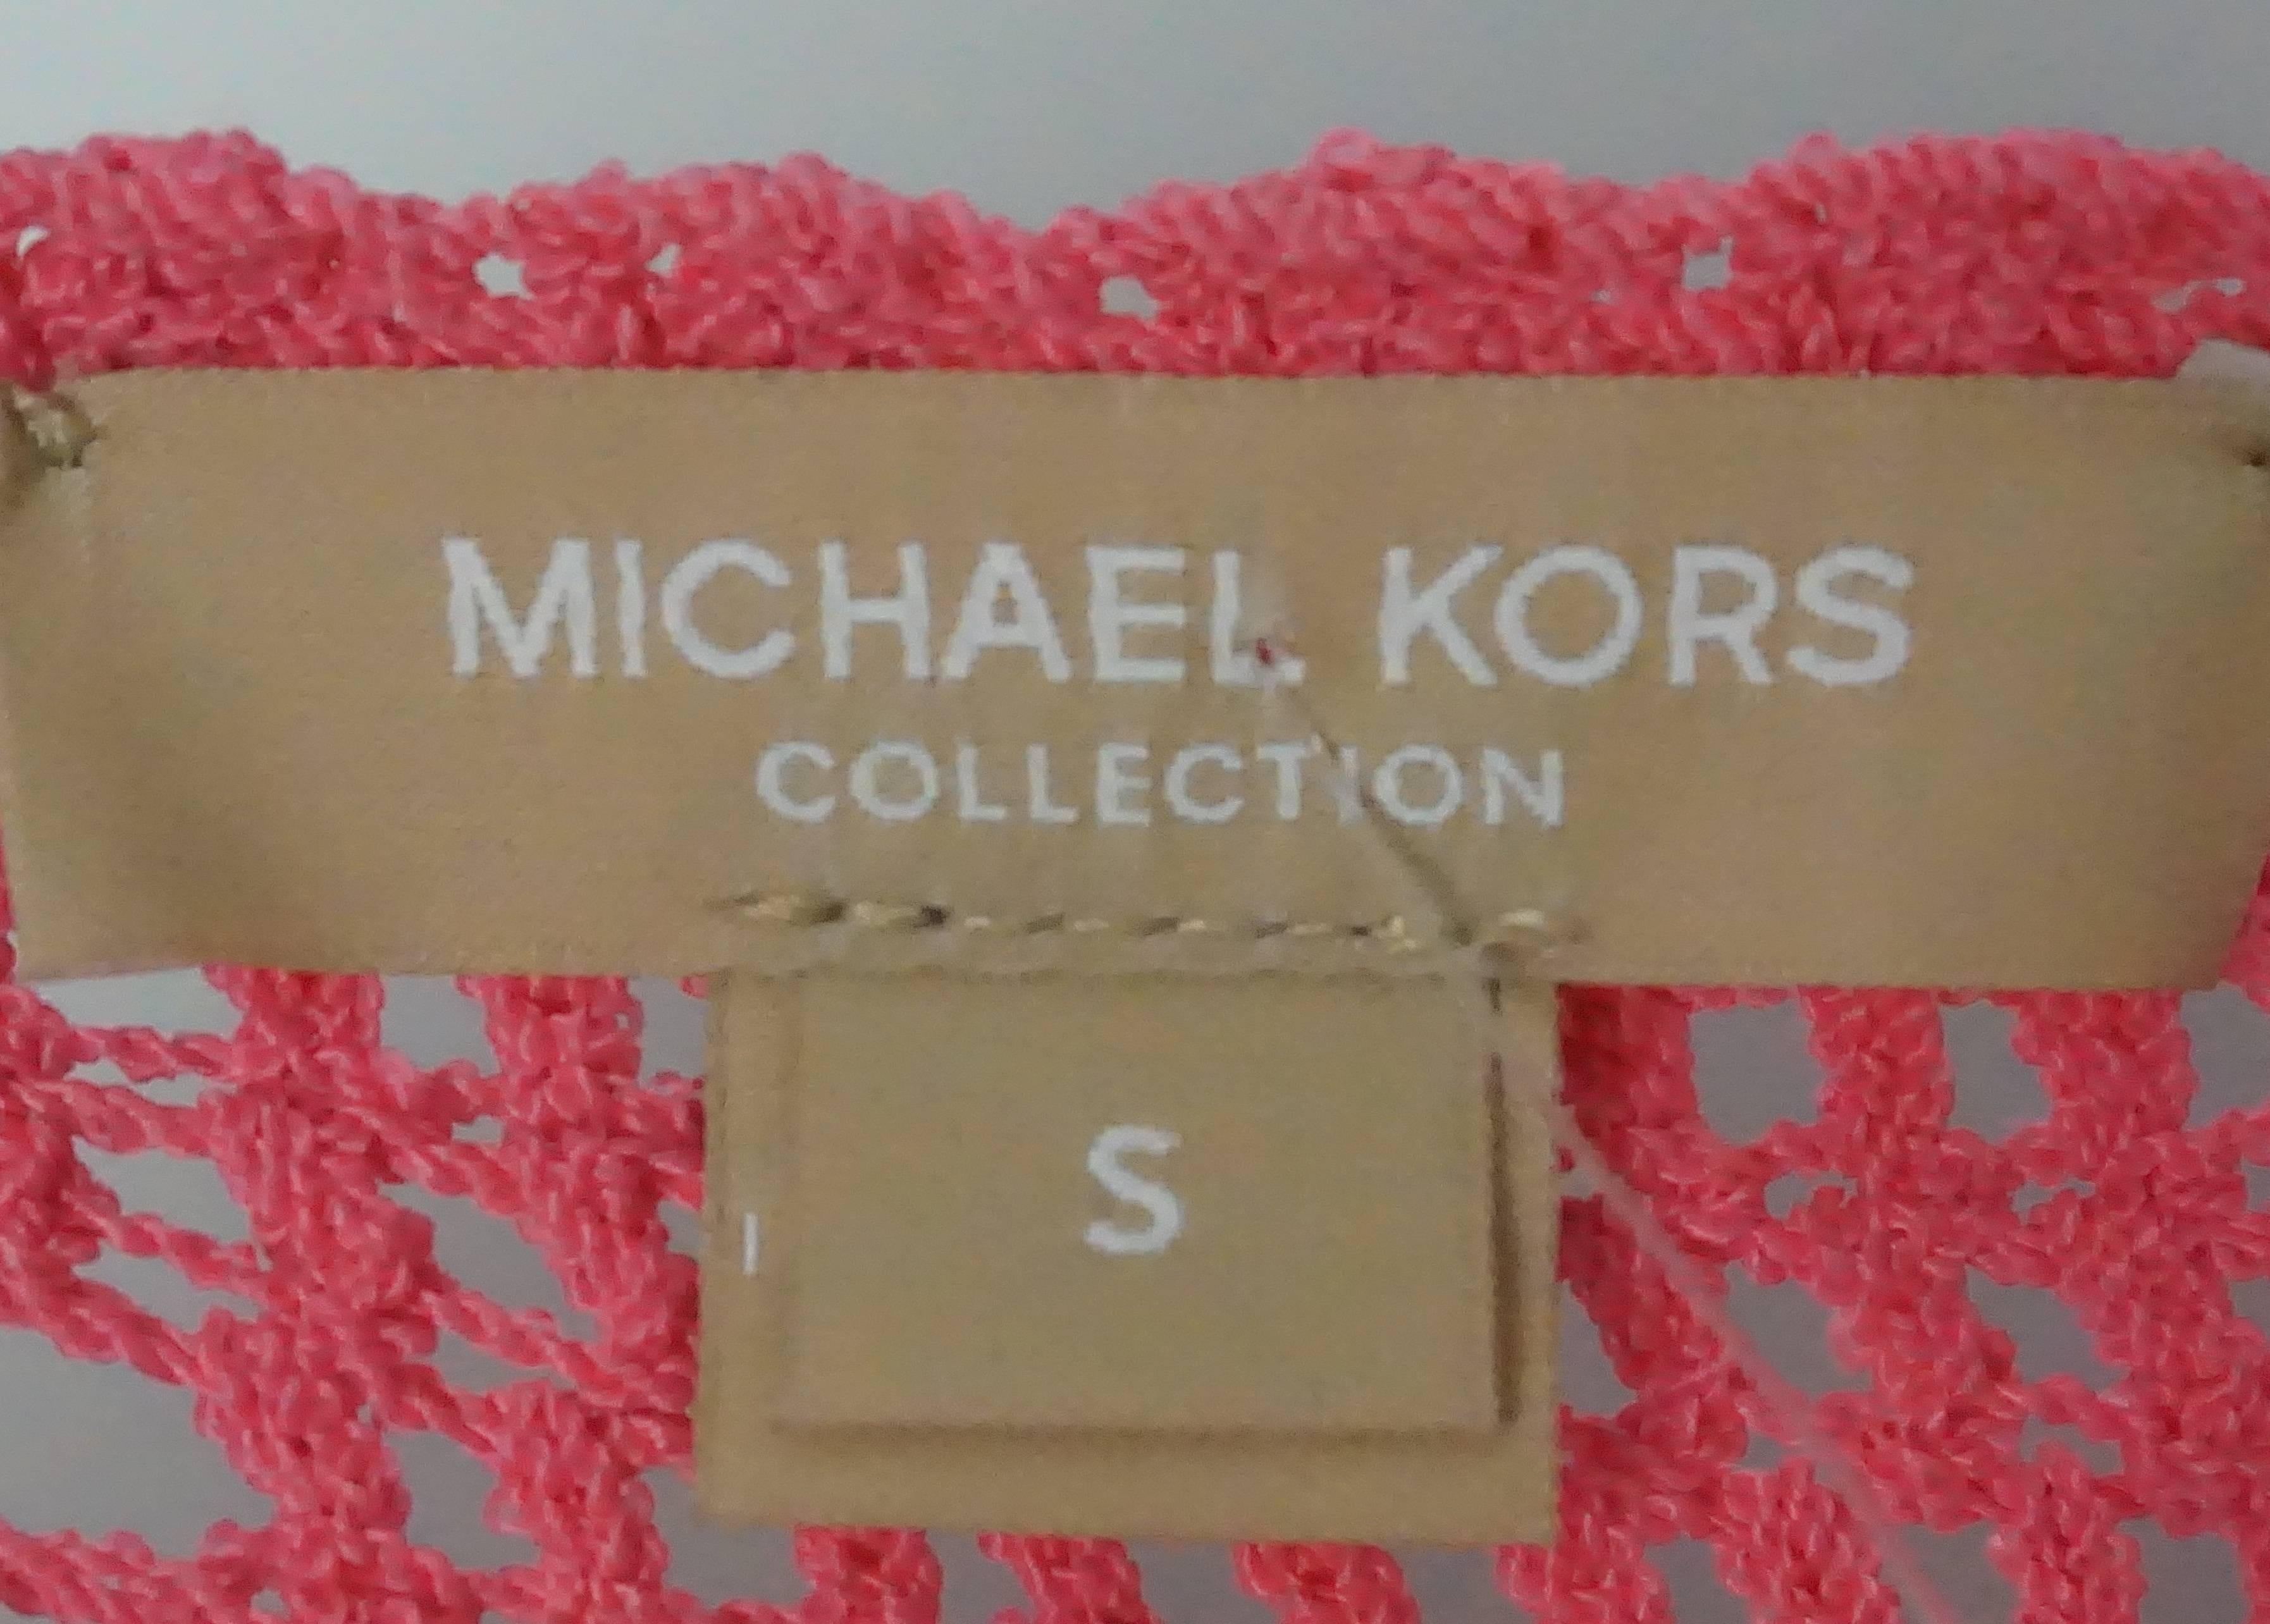 Michael Kors Pink Knit Dress - Small  In Excellent Condition For Sale In West Palm Beach, FL